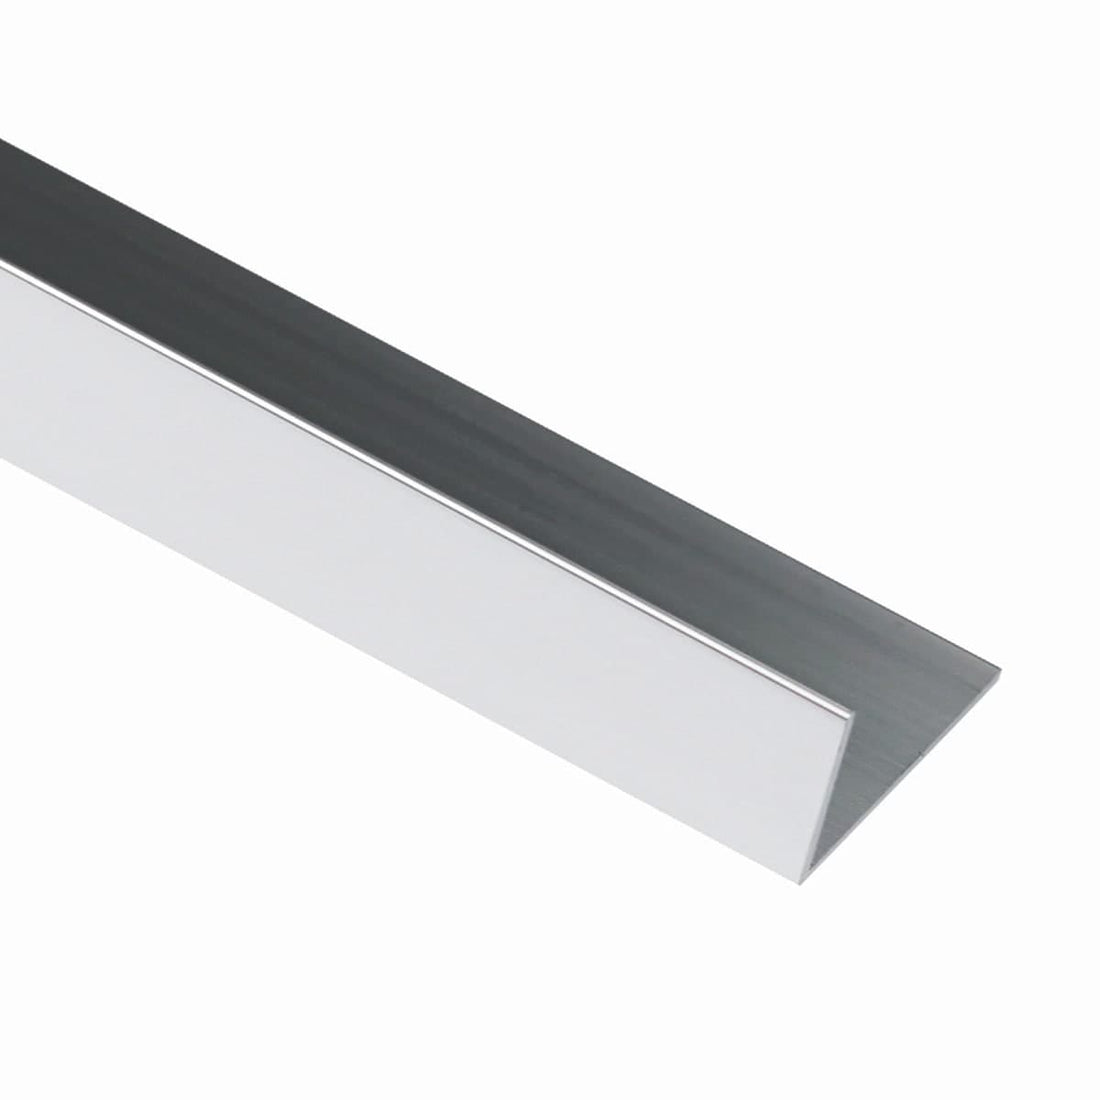 ANGLE PROFILE L MM2000X10 STAINLESS STEEL - best price from Maltashopper.com BR410003677